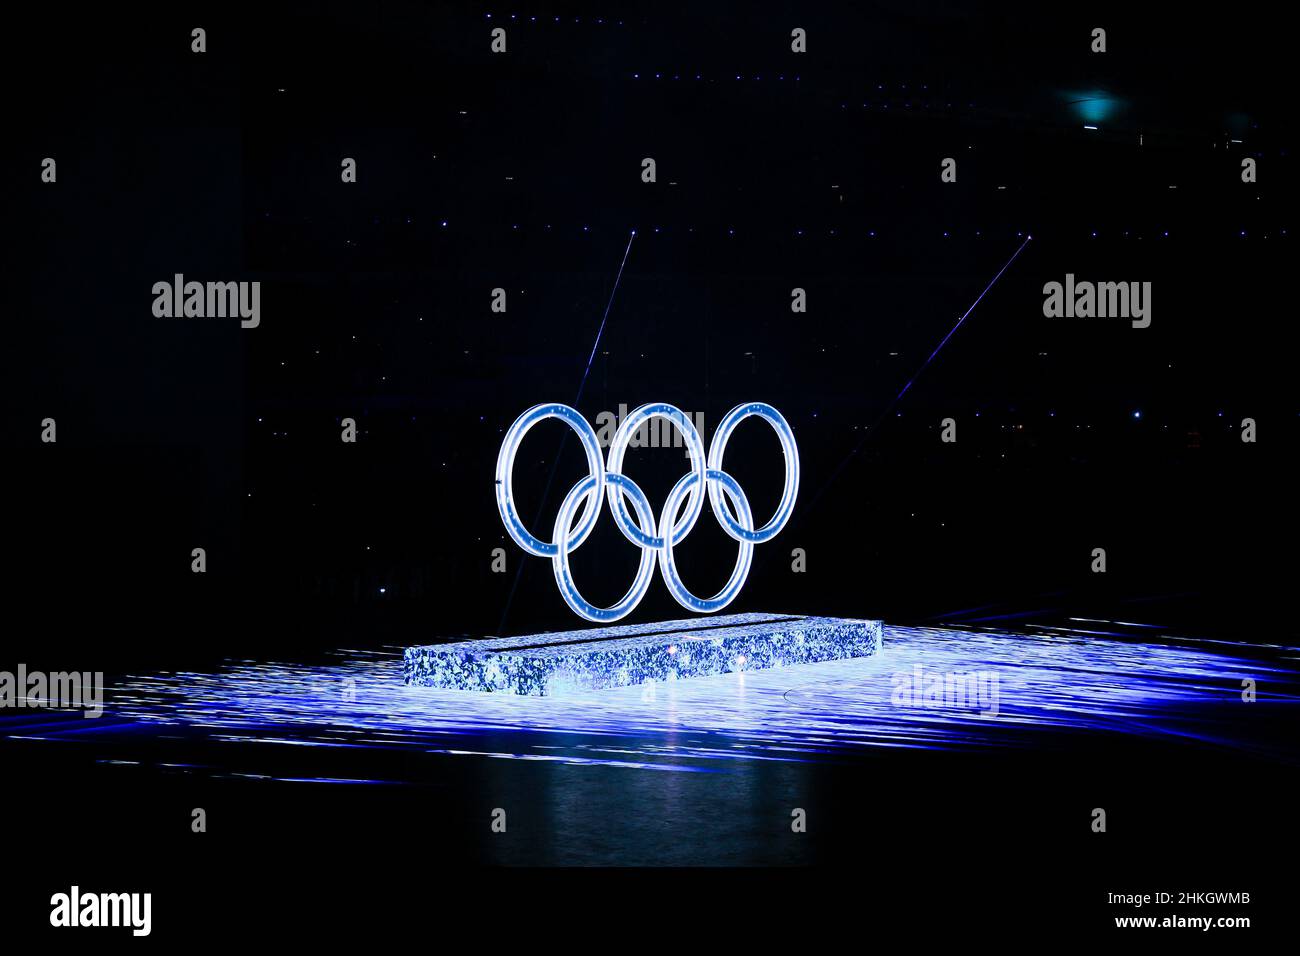 Illustration, ambiance during the Olympic Winter Games Beijing 2022, Opening Ceremony on February 4, 2022 at the National Stadium in Beijing, China - Photo: Osports/DPPI/LiveMedia Stock Photo